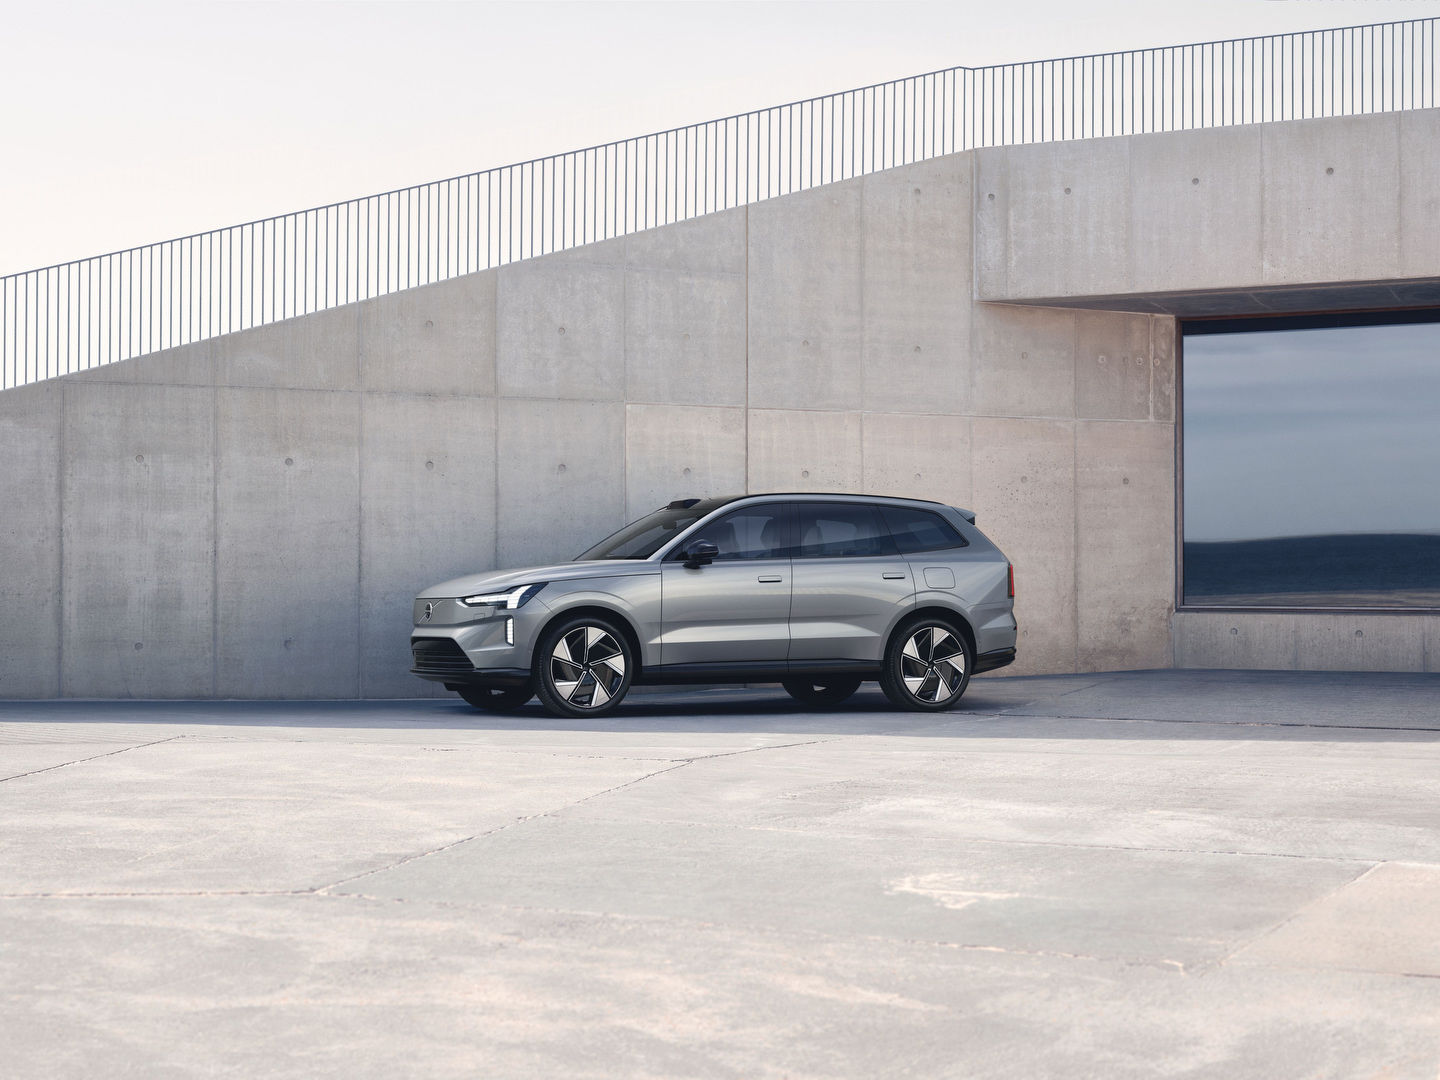 Volvo EX90: A Green, Safe, and Tech-Forward SUV